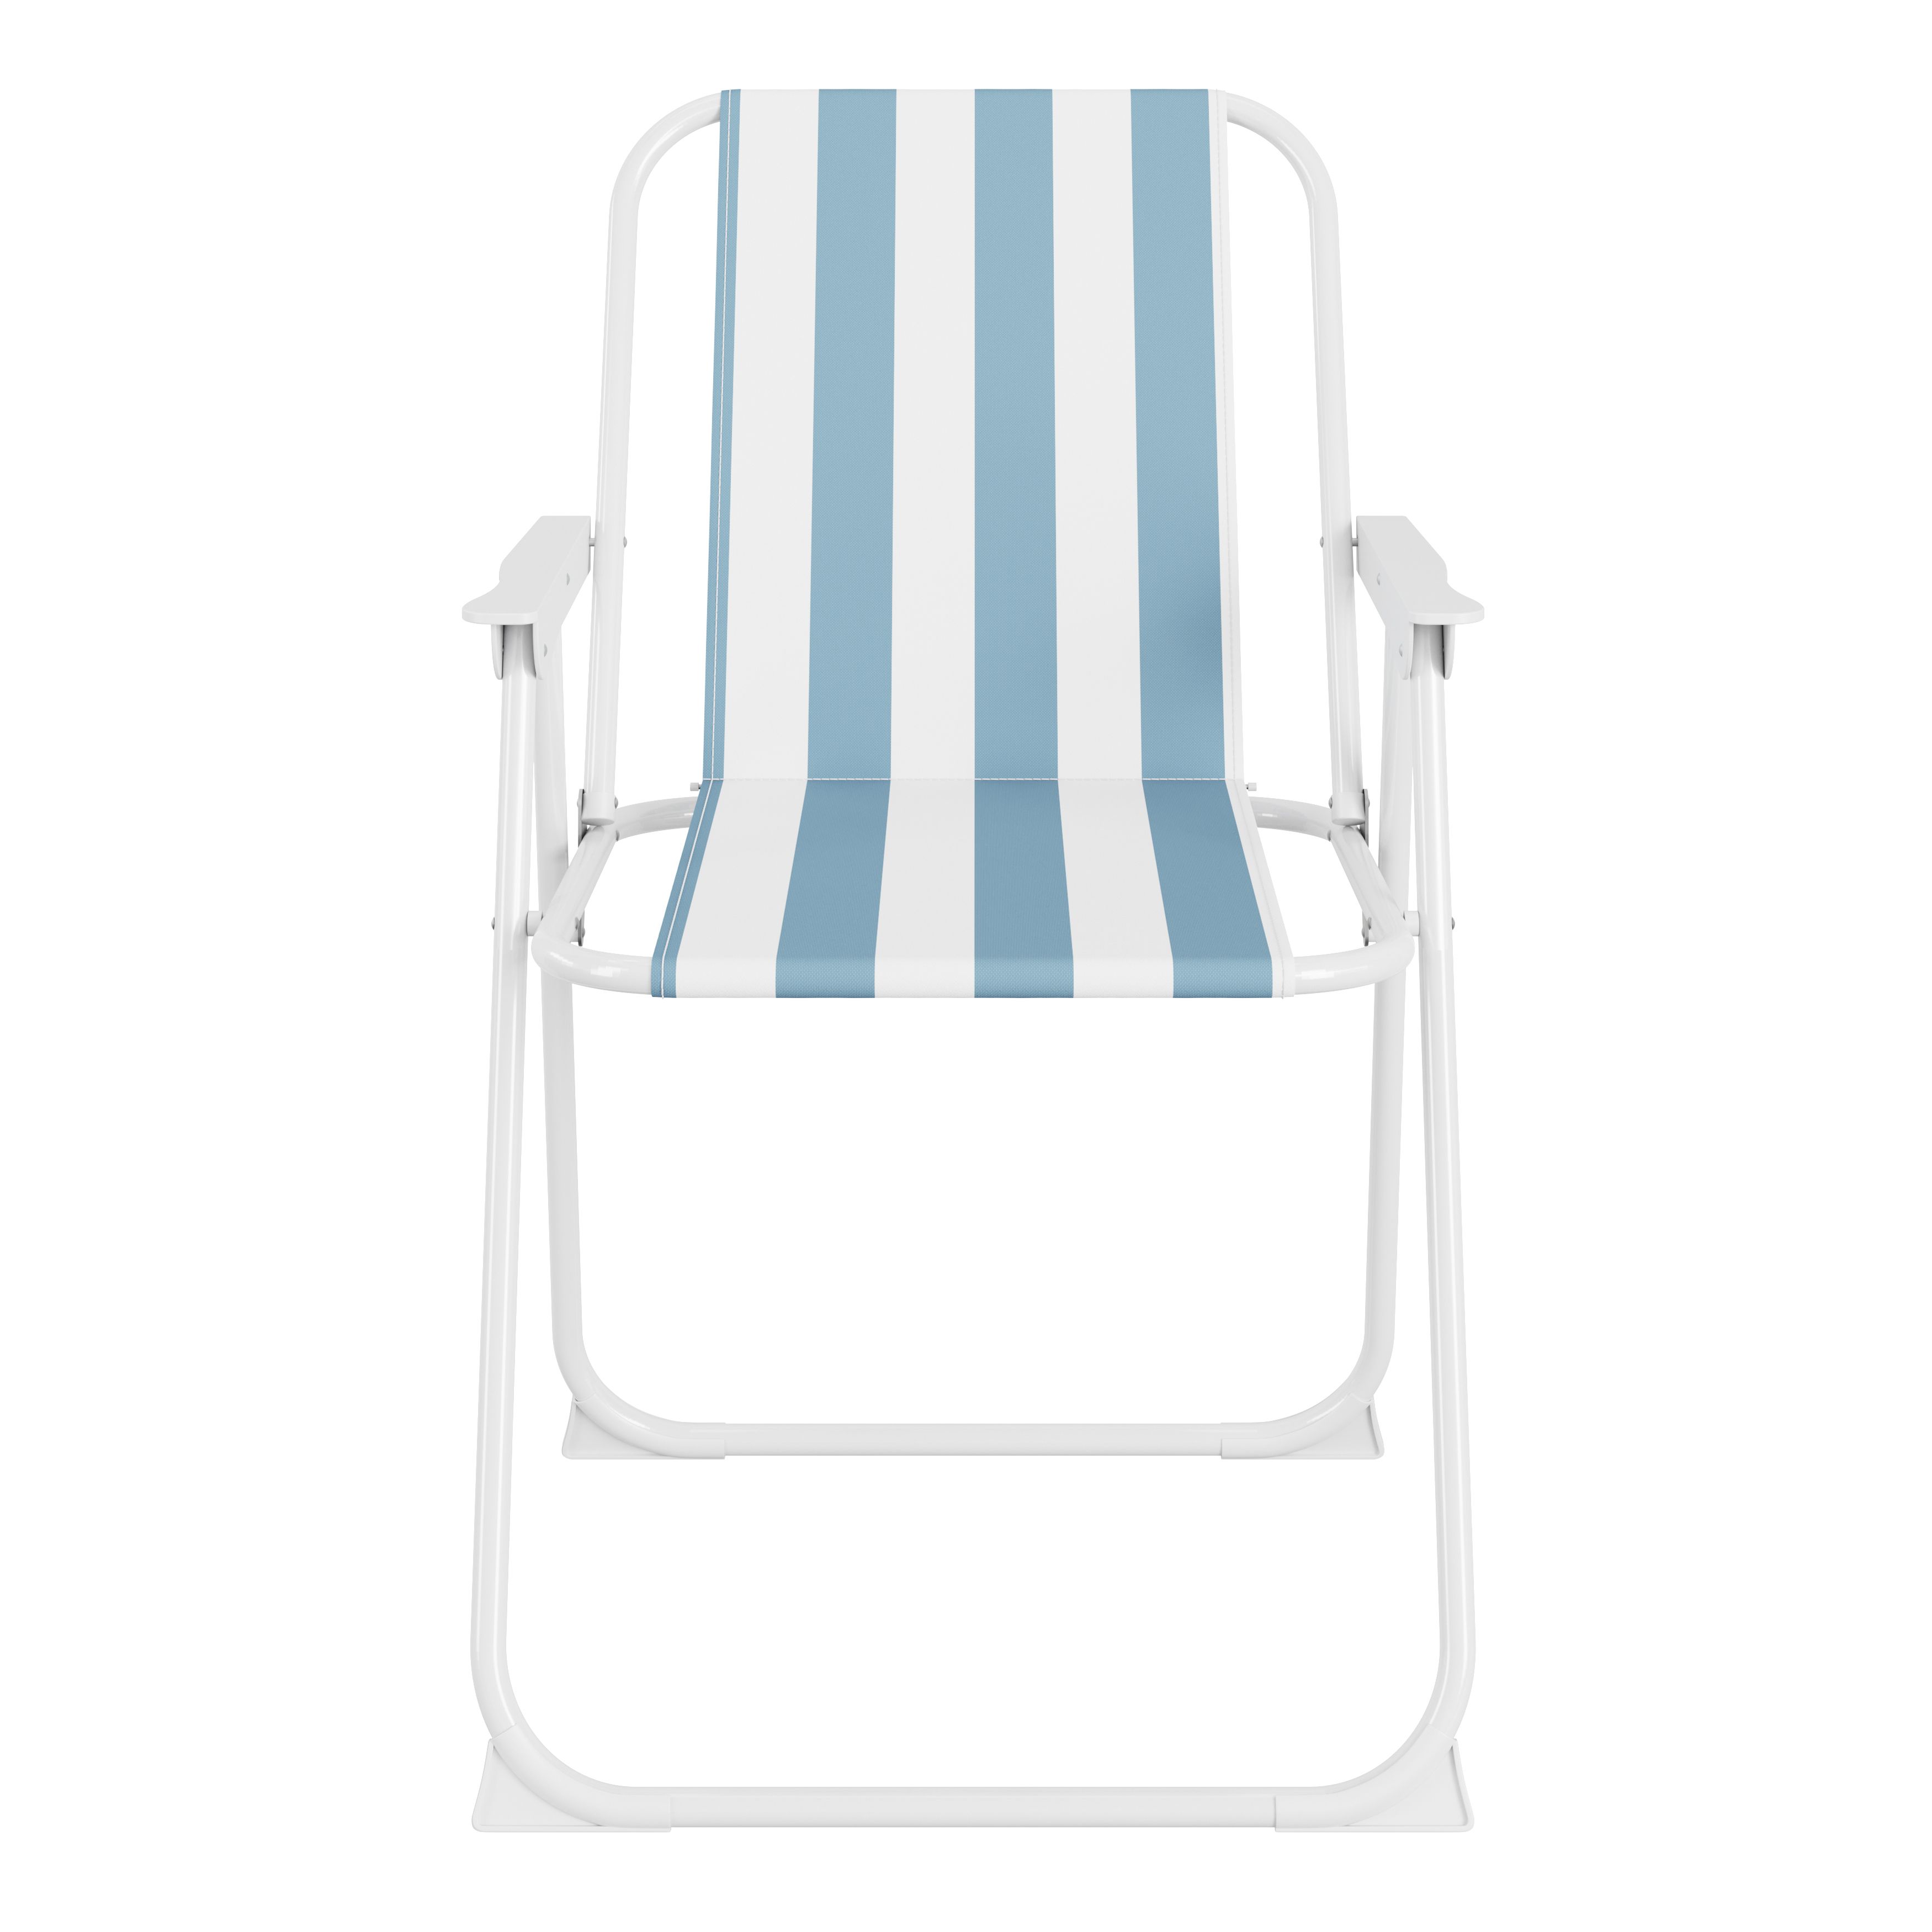 Curacao Still water blue Foldable Cabana striped Picnic chair